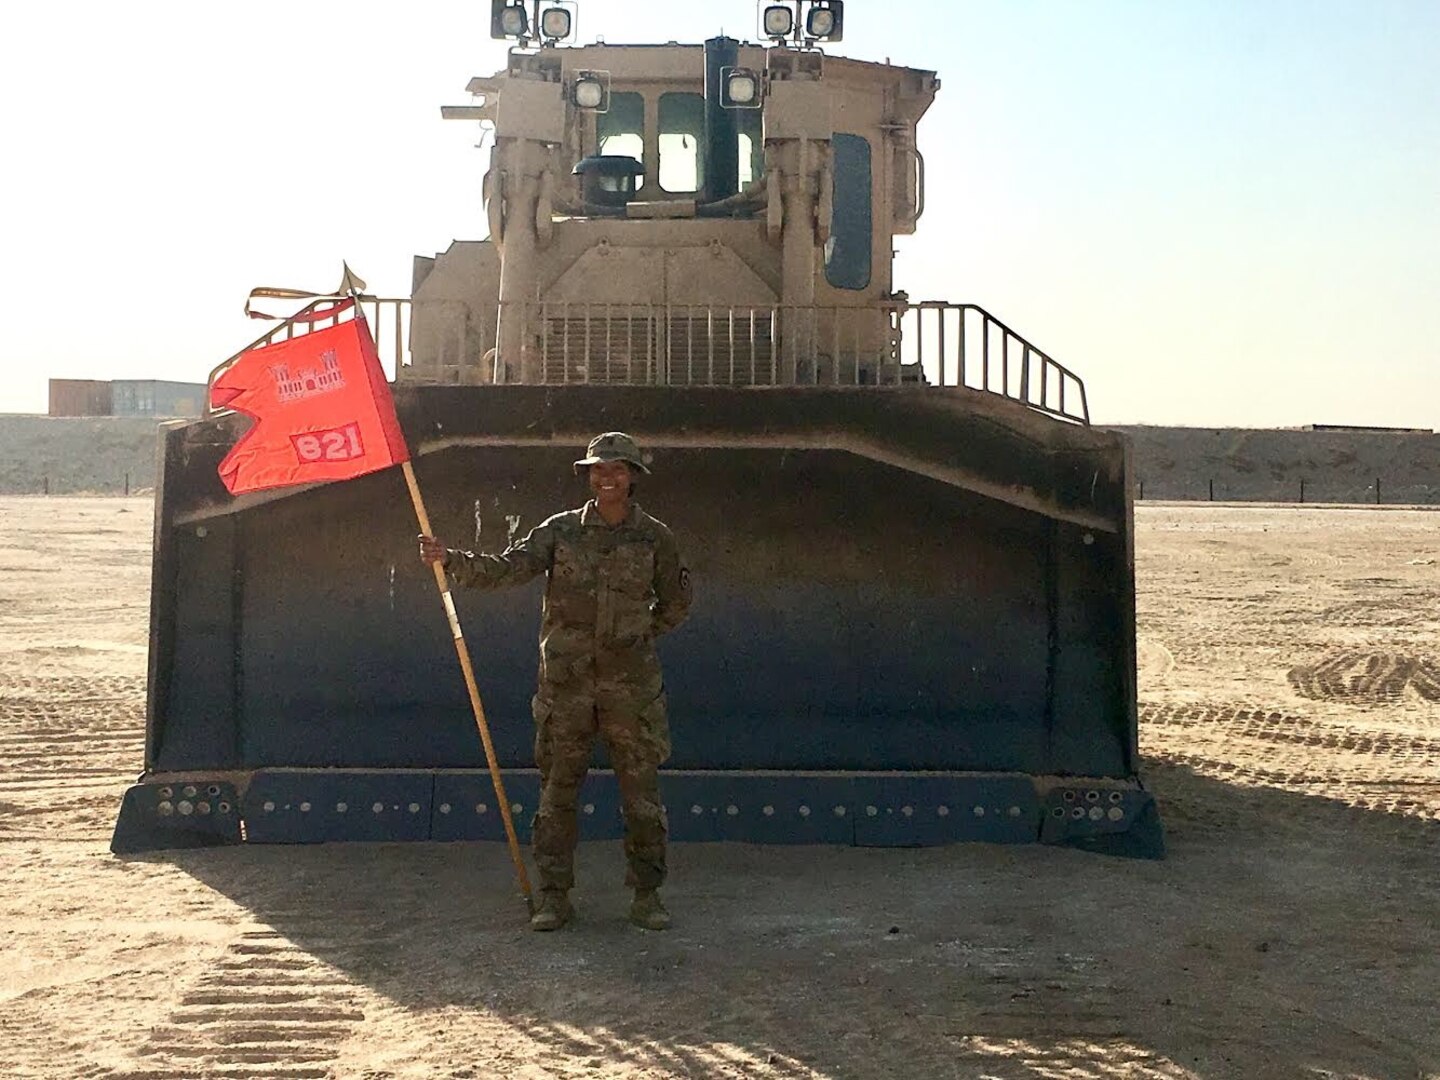 Spc. Amia Adkins stand in front of a bulldozer in the Middle East, holding the WVNG's 821st Engineer Company Gideon.